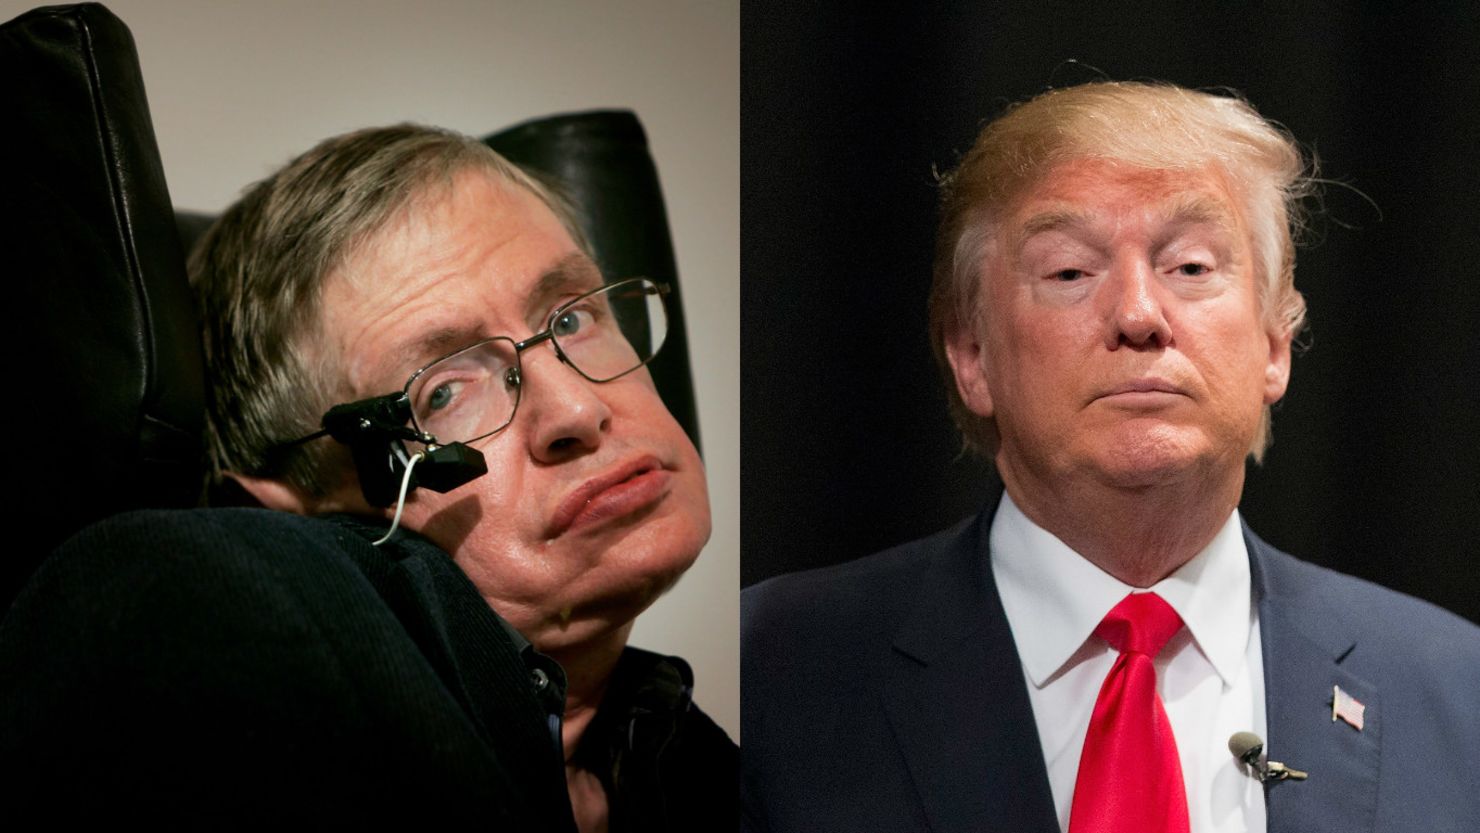 Theoretical physicist Stephen Hawking says he likes and admires the US but fears he may not be welcome there.